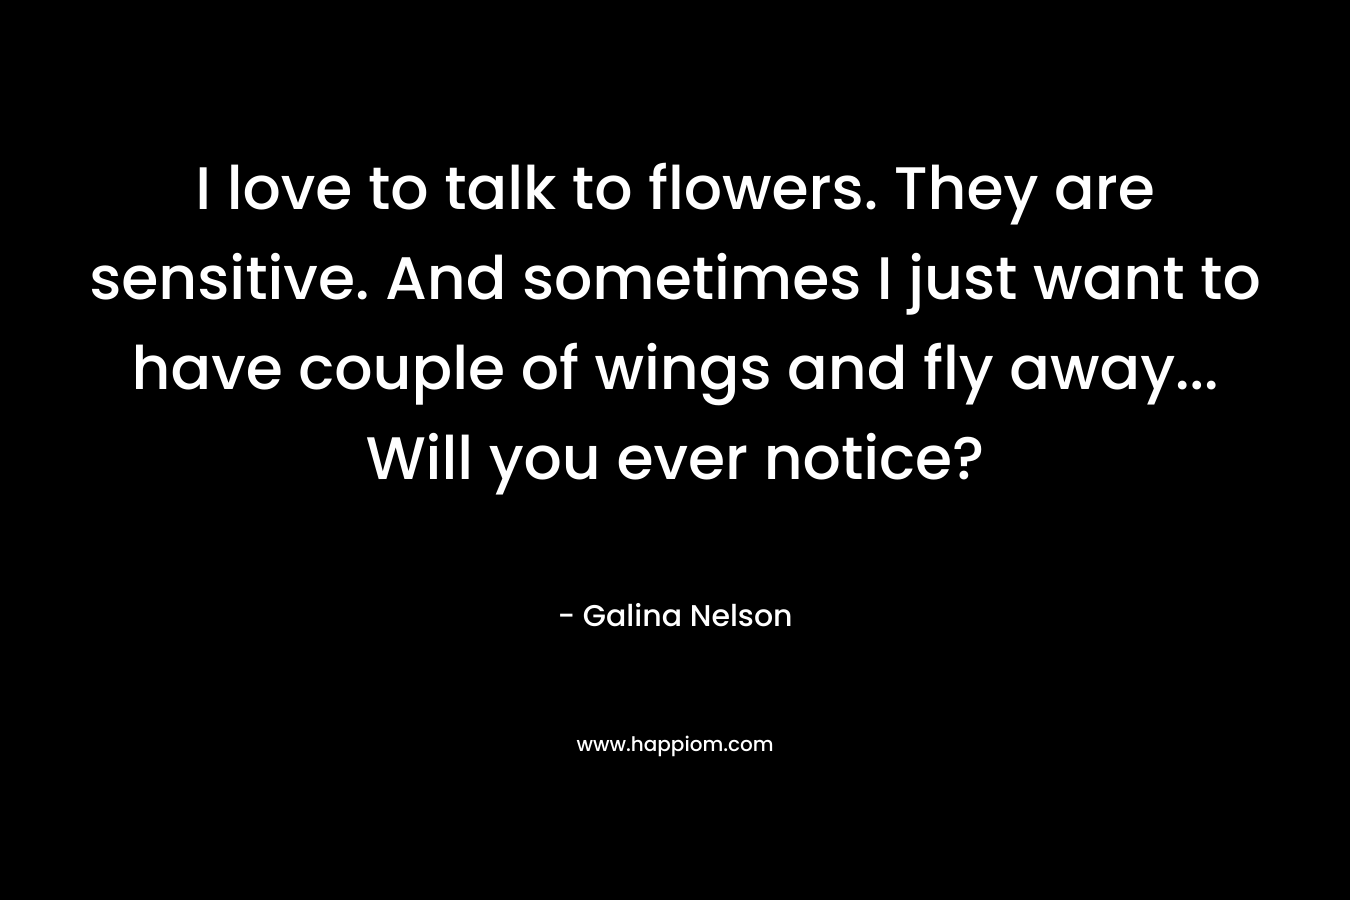 I love to talk to flowers. They are sensitive. And sometimes I just want to have couple of wings and fly away… Will you ever notice? – Galina Nelson